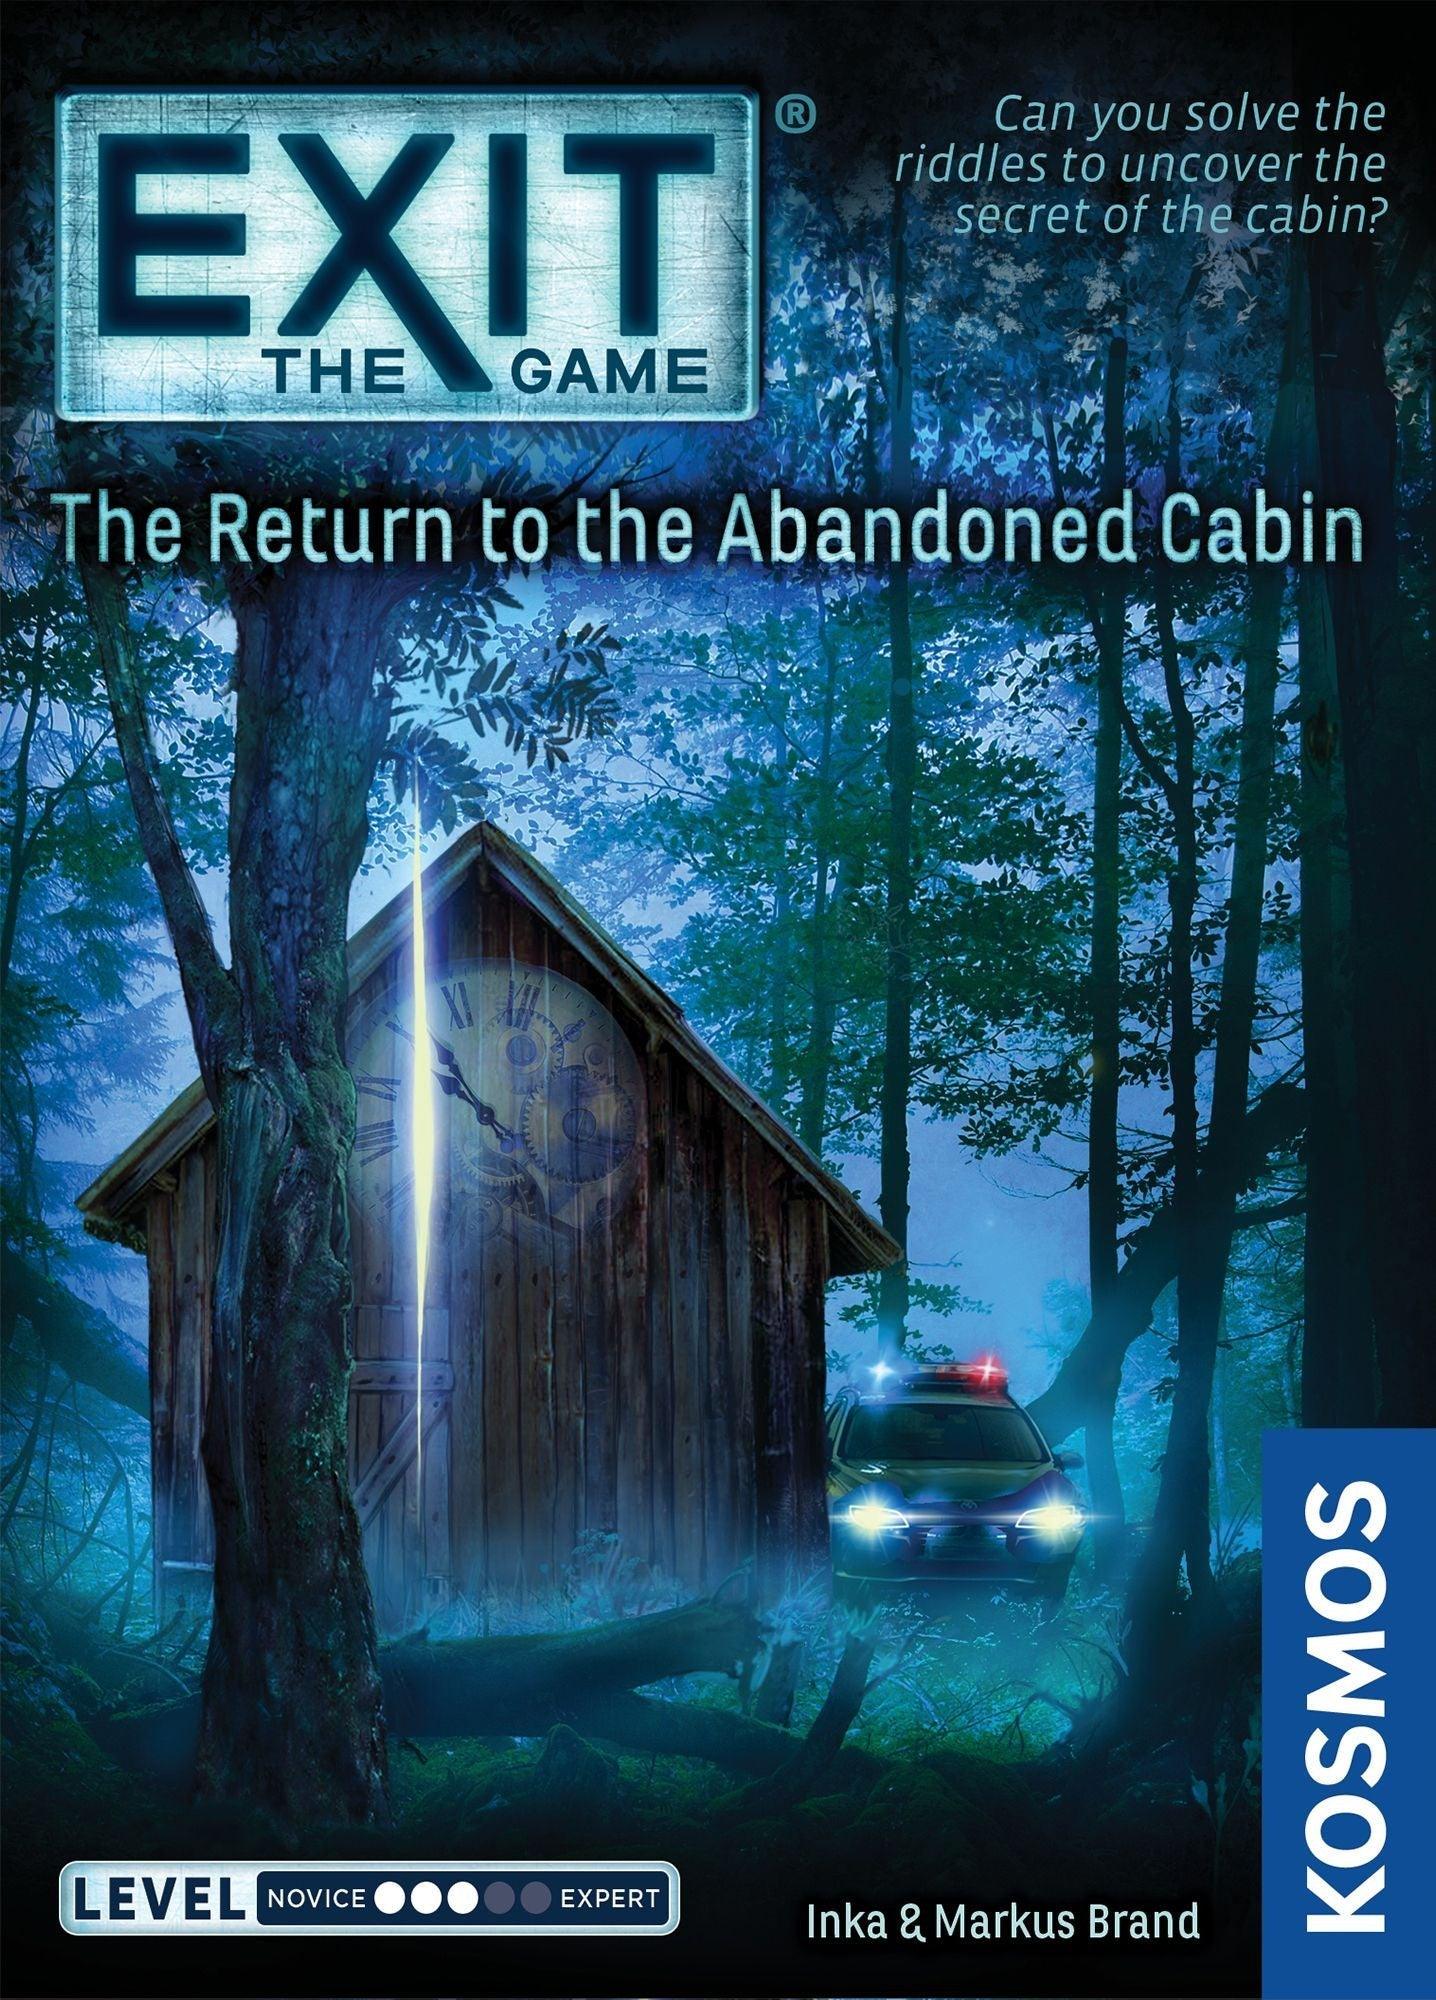 VR-96899 Exit the Game Return to the Abandoned Cabin - Kosmos - Titan Pop Culture